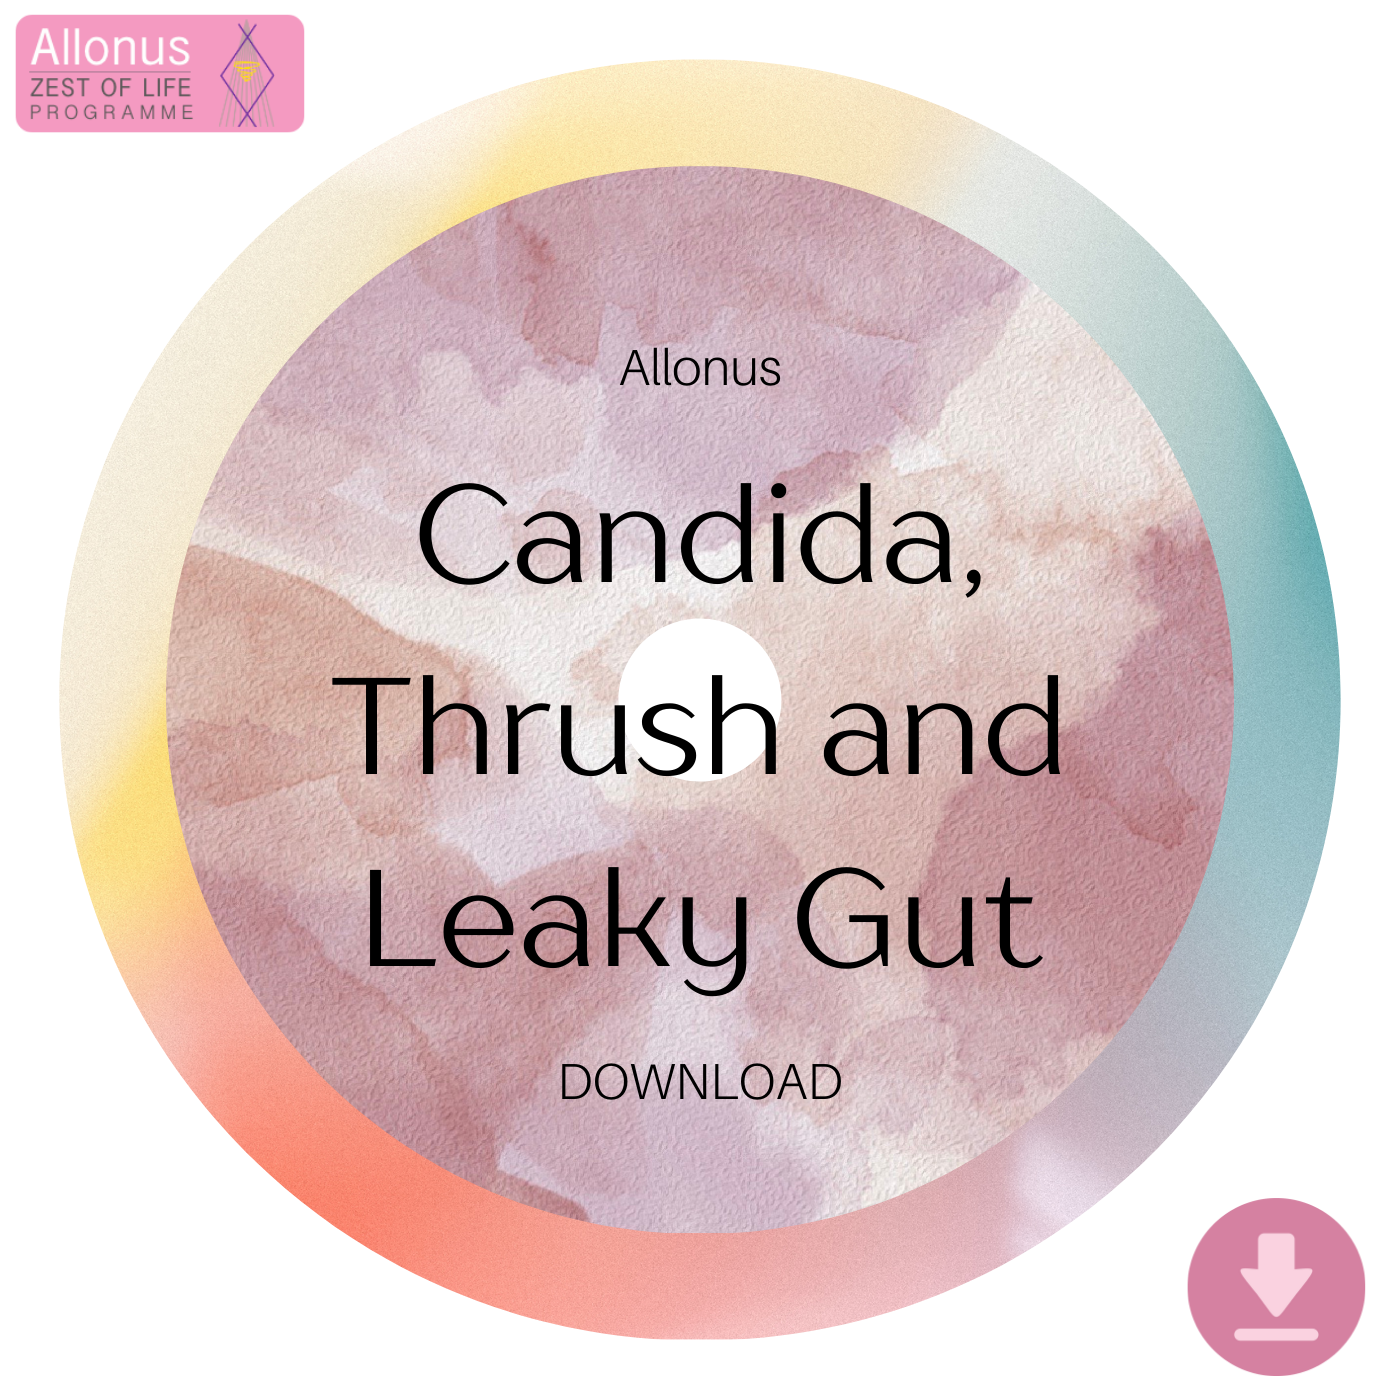 Candida, Thrush and Leaky Gut - Digital Download